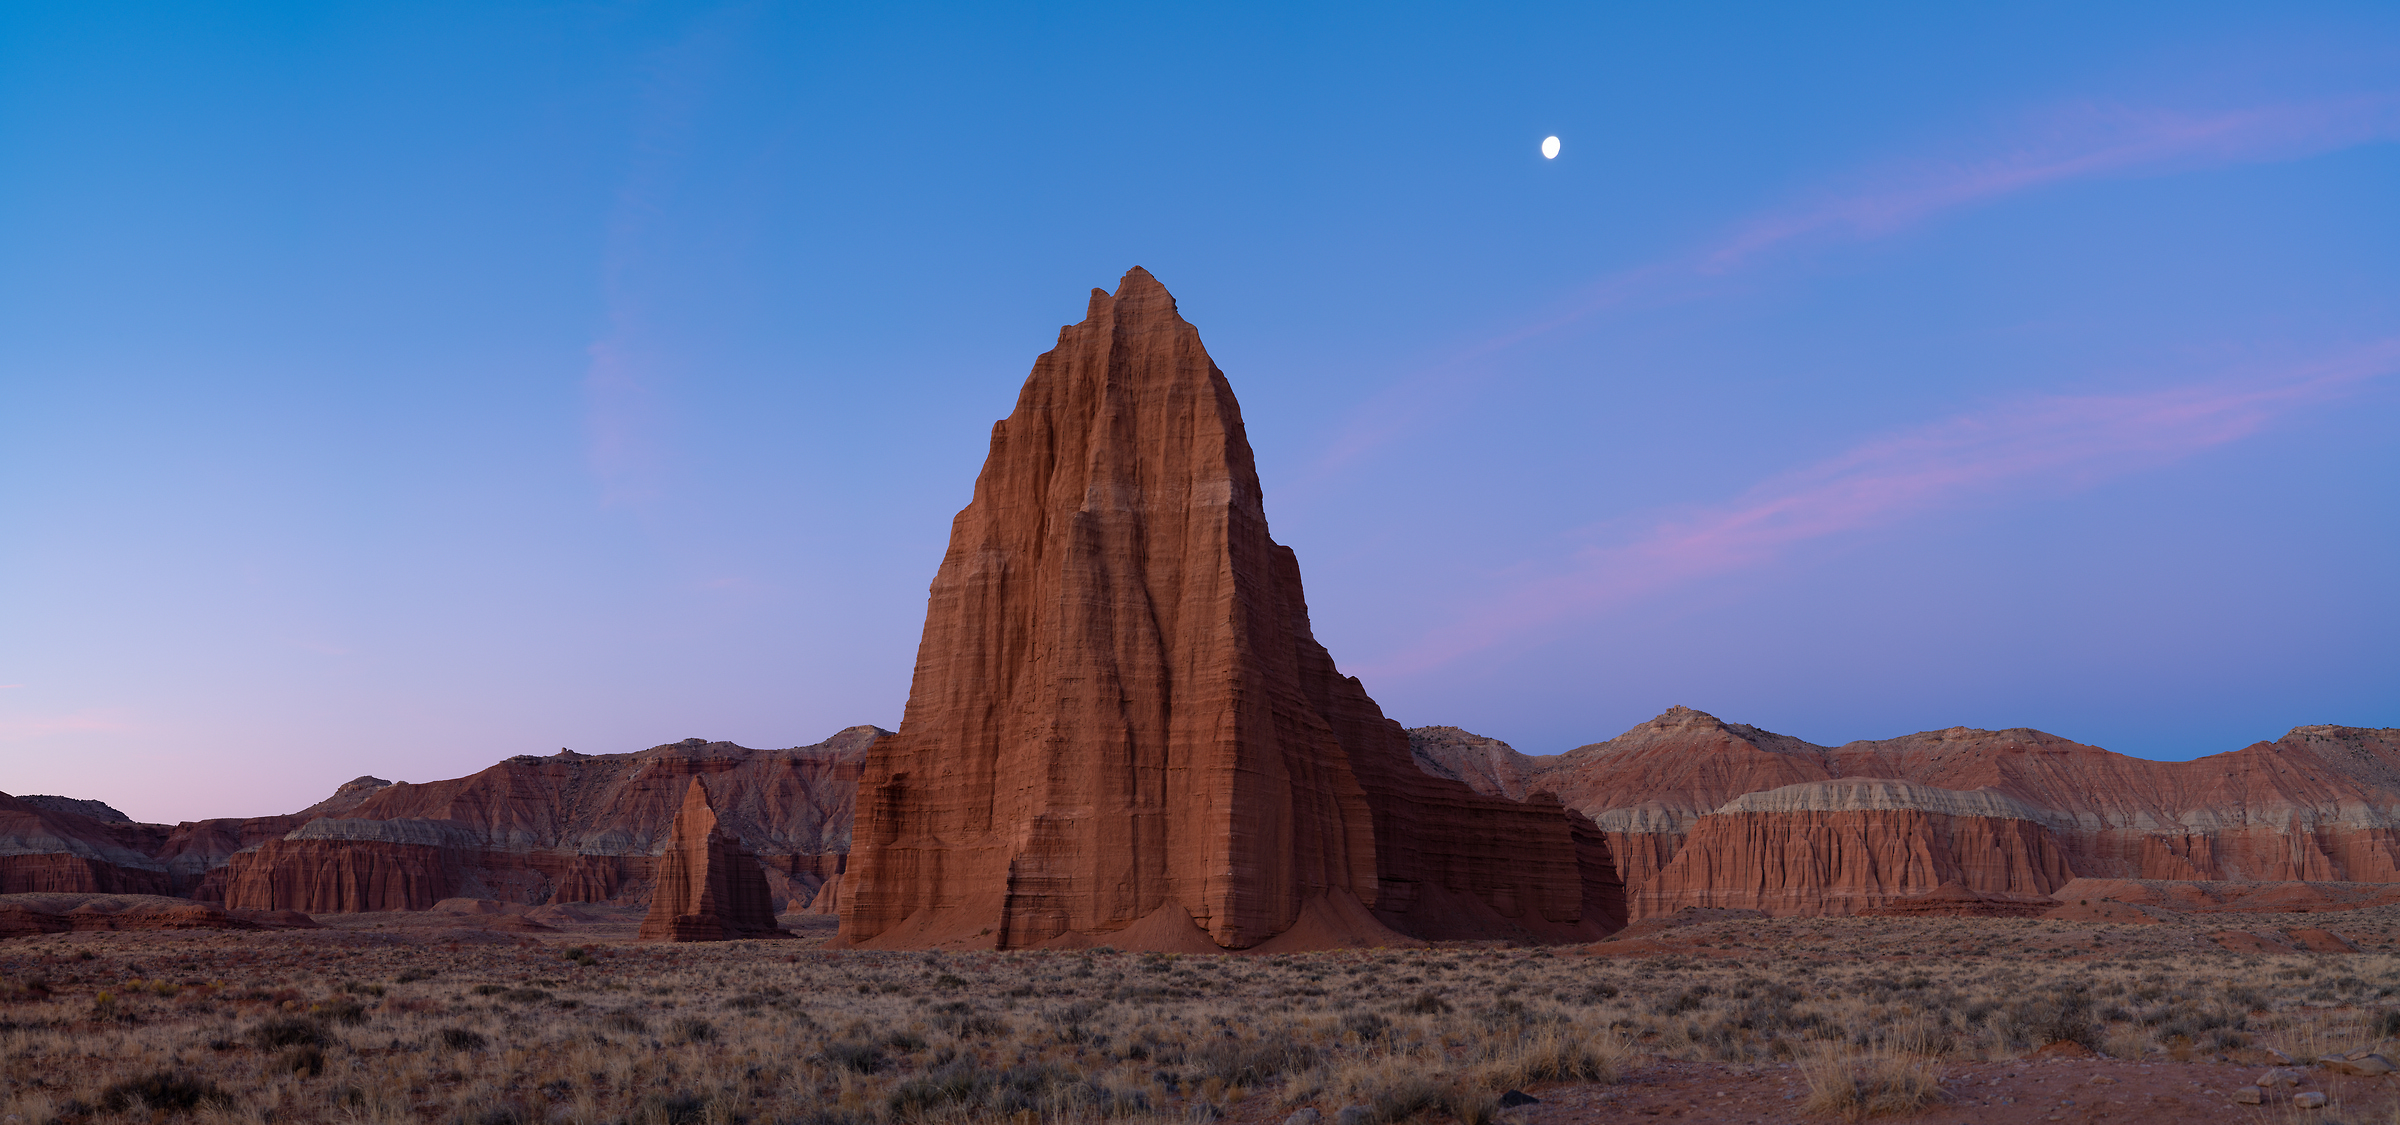 275 megapixels! A very high resolution, large-format VAST photo print of a meditative landscape photo with the temples of Capitol Reef National Park, sunset, and the moon; photograph created by Greg Probst in Utah.